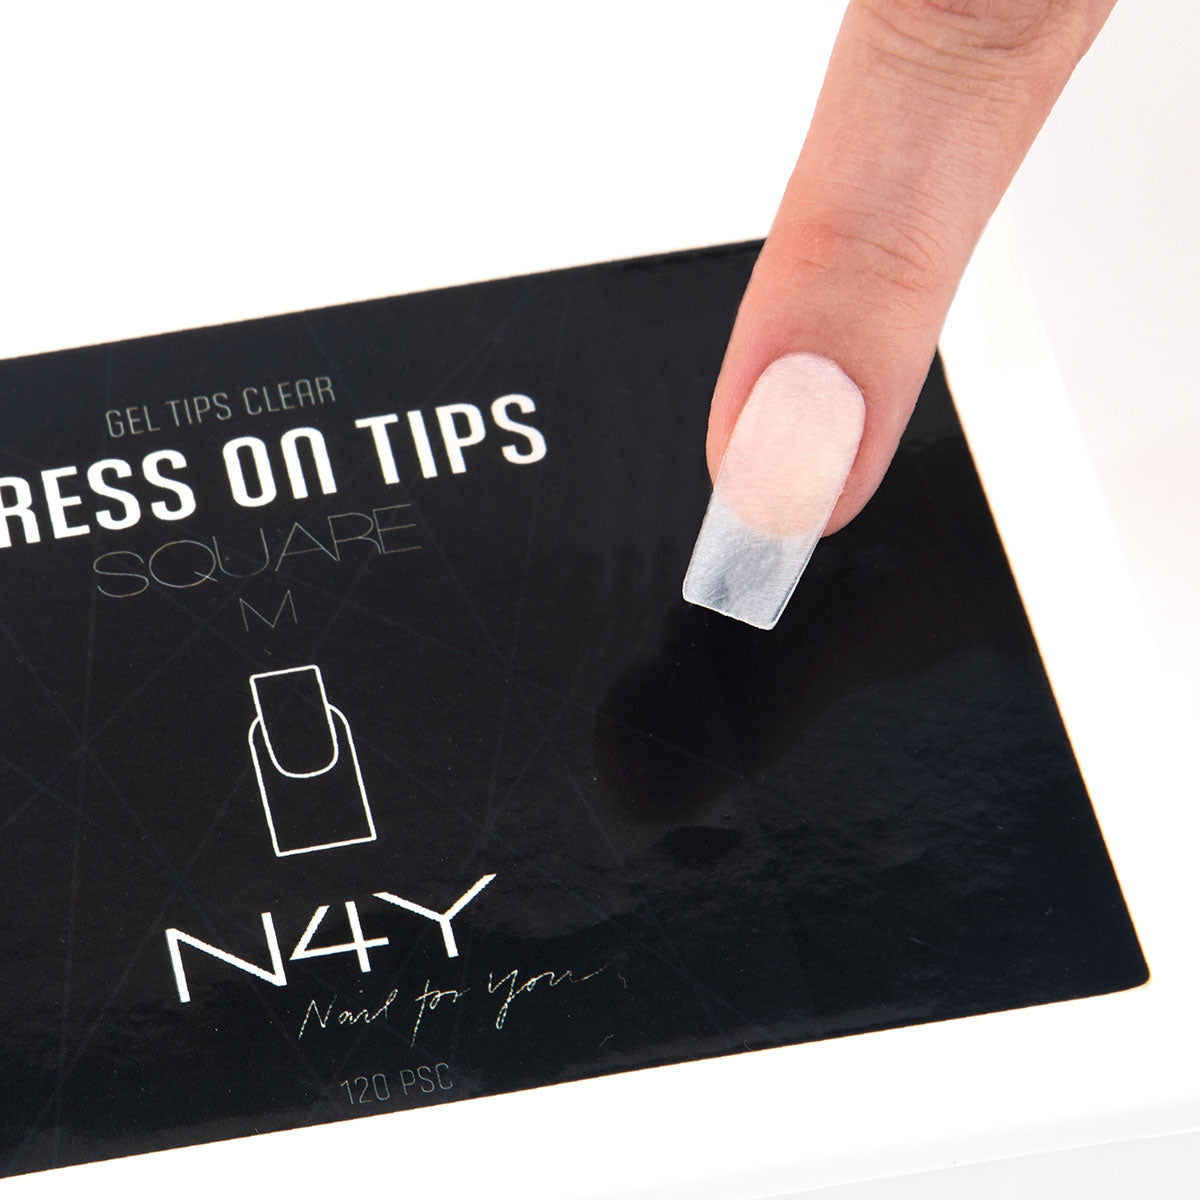 N4Y Press On Tips - Square Clear